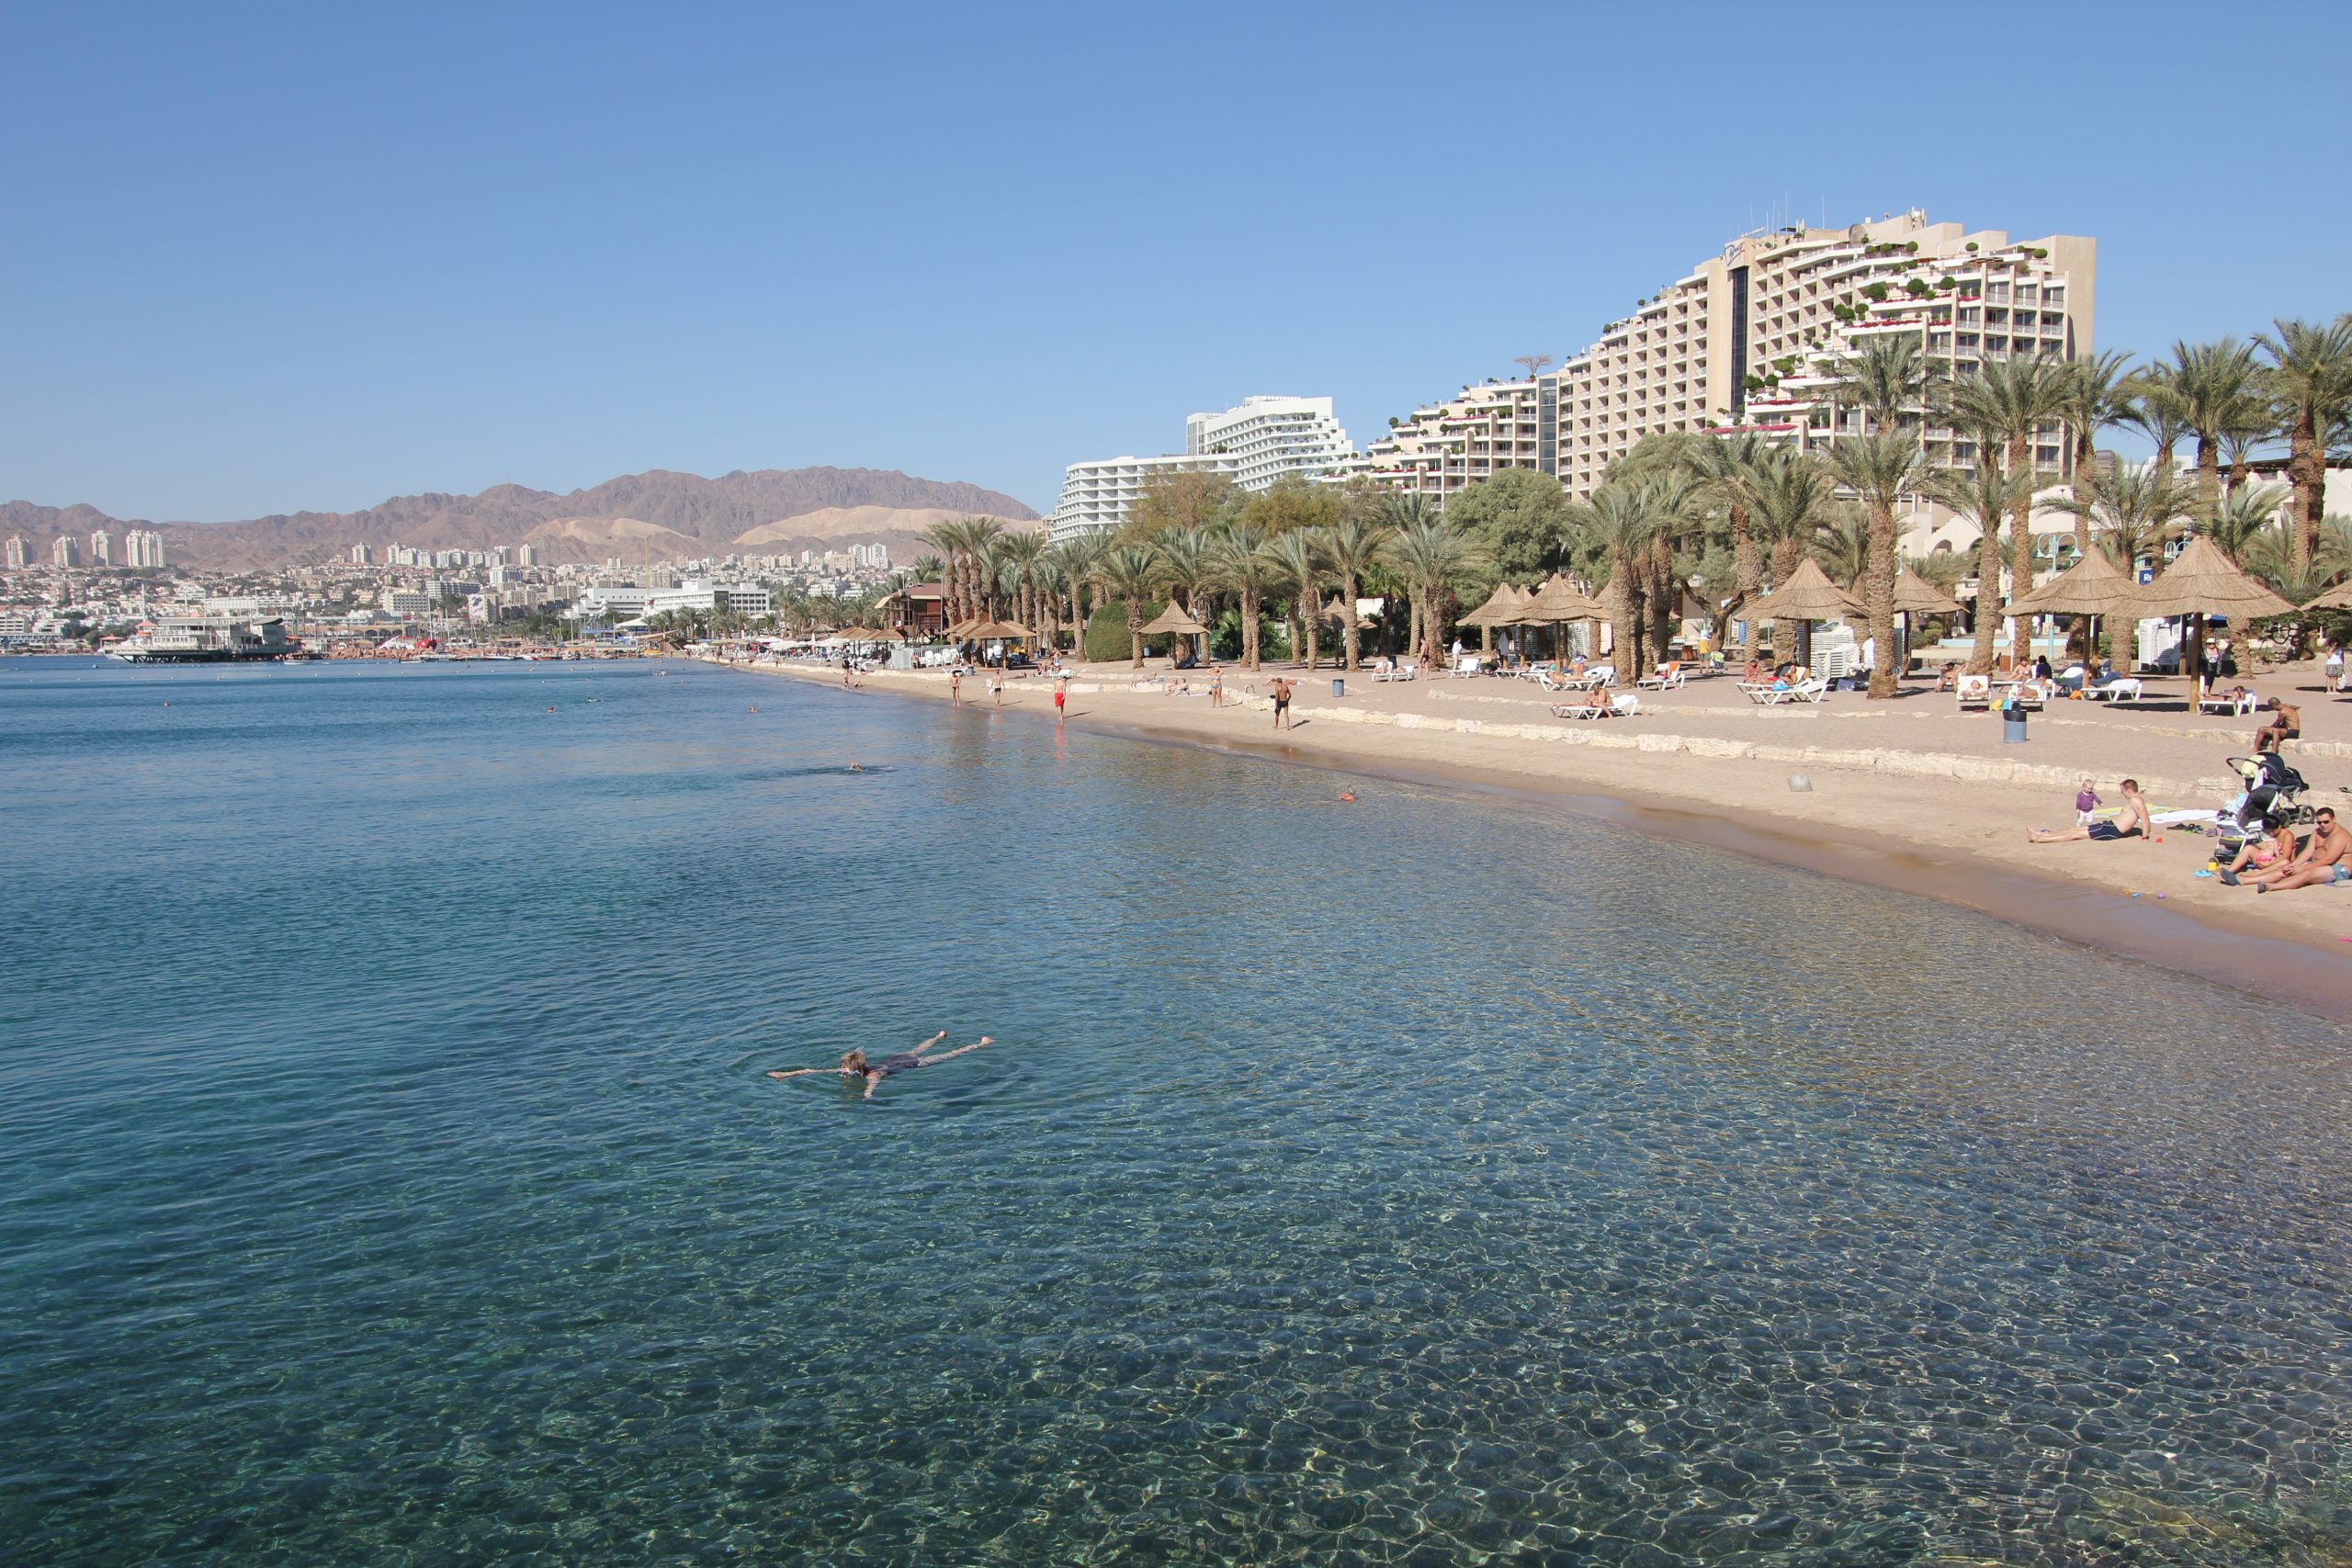 Eilat's tourism industry was struggling to survive long before COVID-19